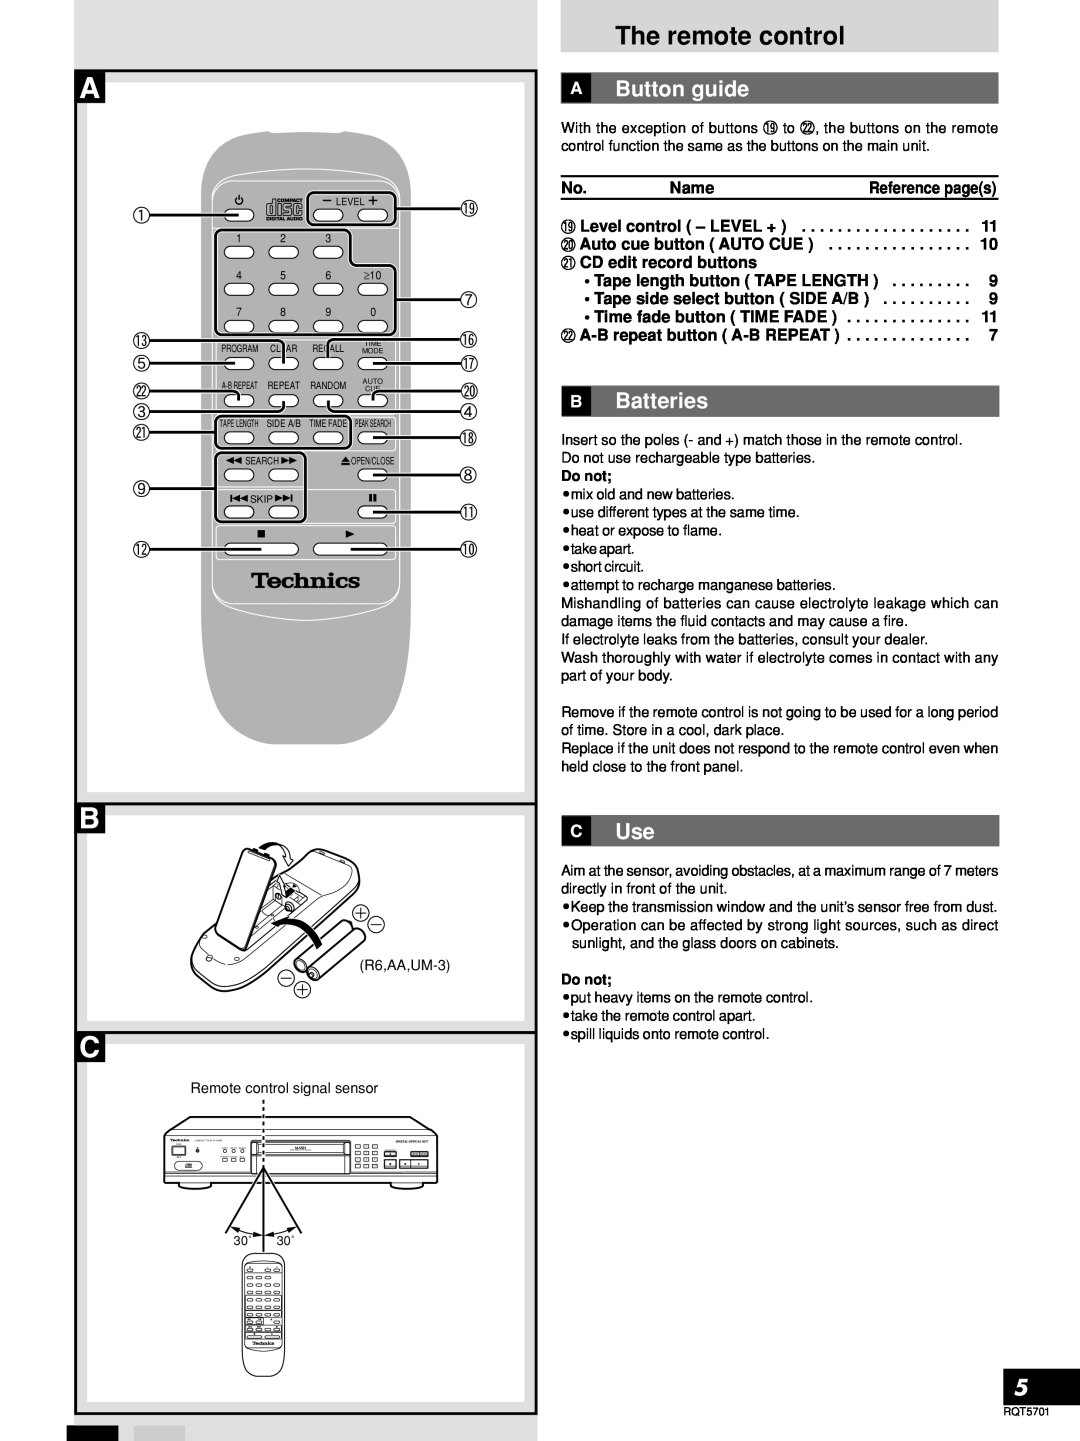 Panasonic SL-PG4 manual The remote control, Button guide, Batteries 